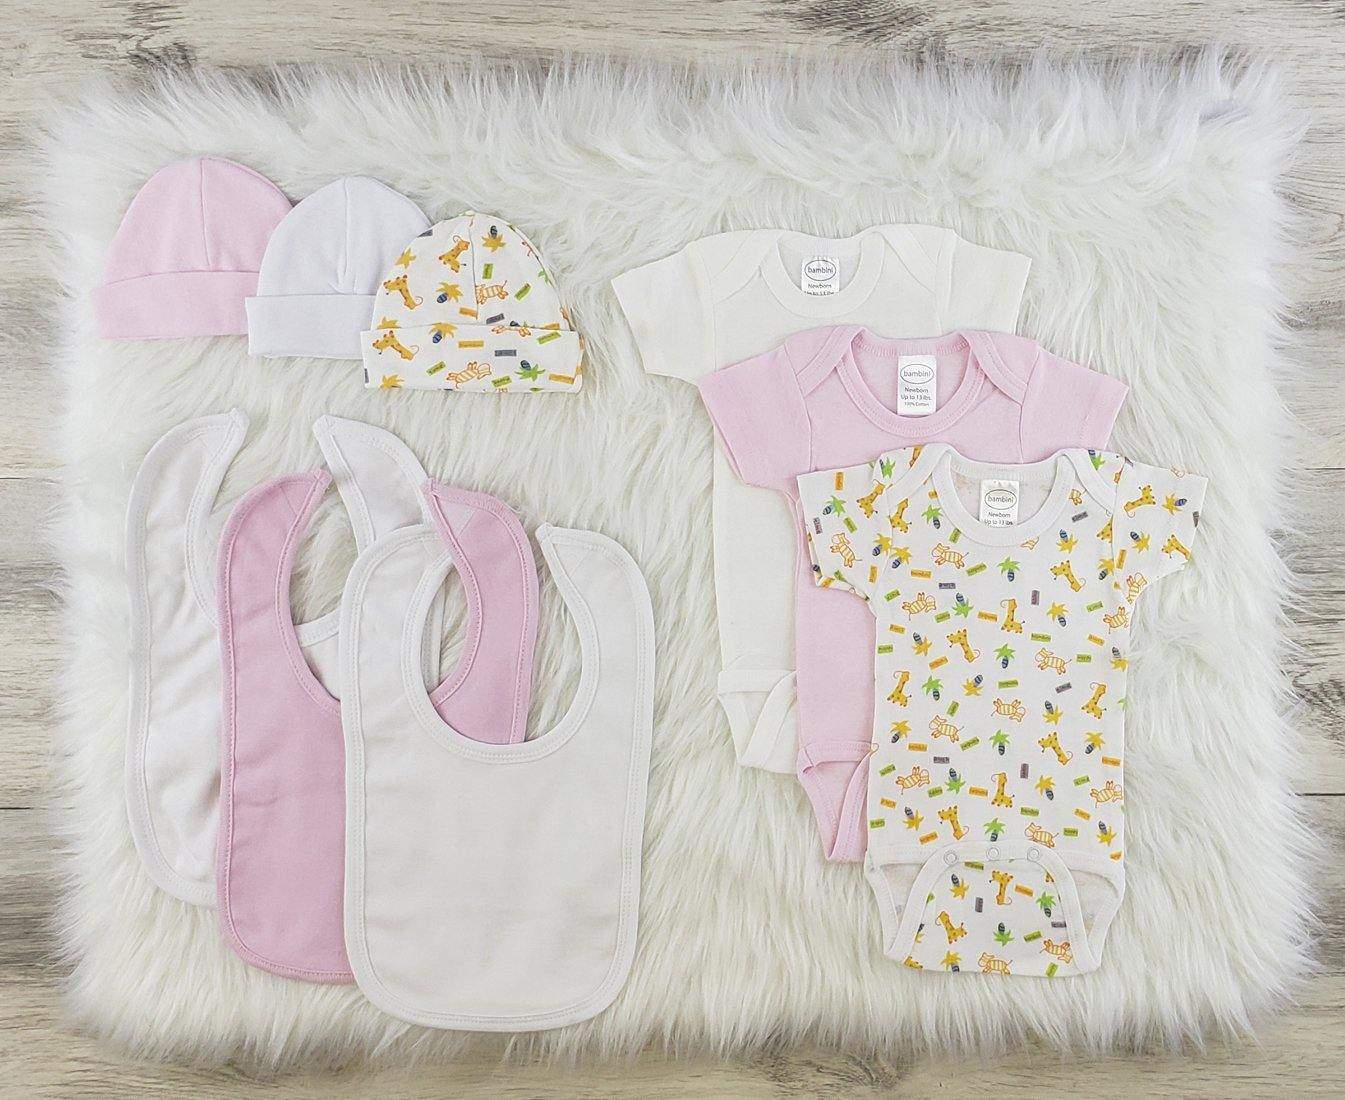 Bambini 9 Pc Girl Layette Bibs, Beanies, Onesies Baby Clothes Set (NB,S,M,L)-Bambini-Baby Clothes,Baby Clothing Set,Beanies,Bibs,Layette Sets,Onesies